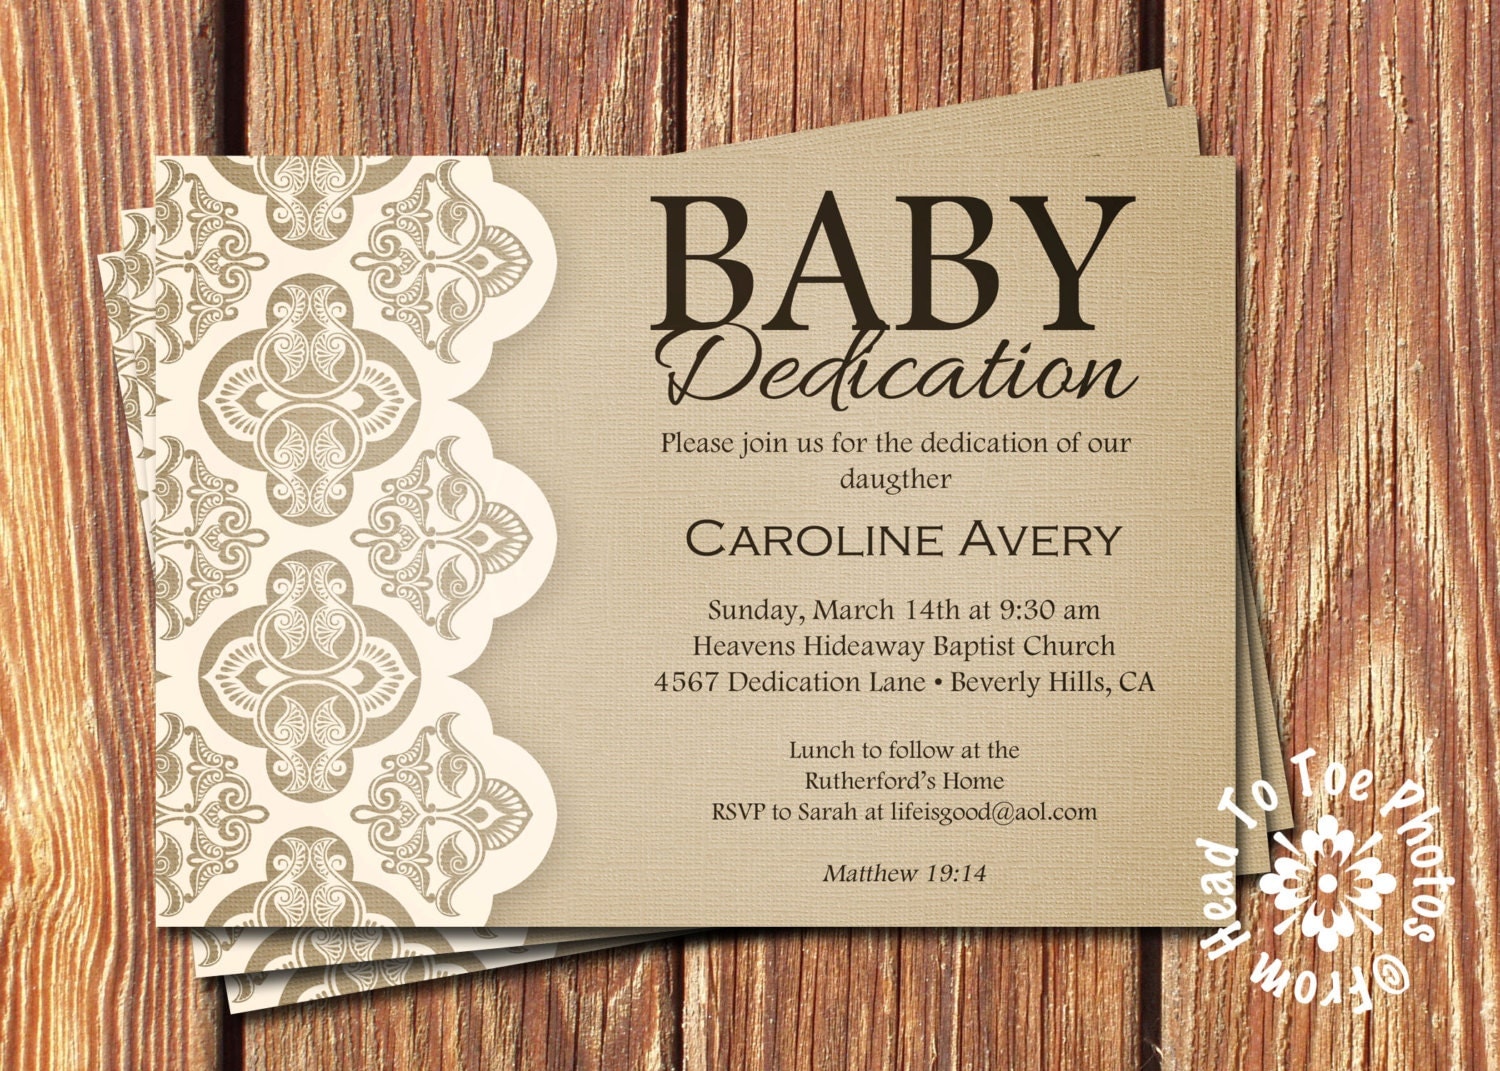 Baby Dedication Invitations by FromHeadtoToeDesigns on Etsy